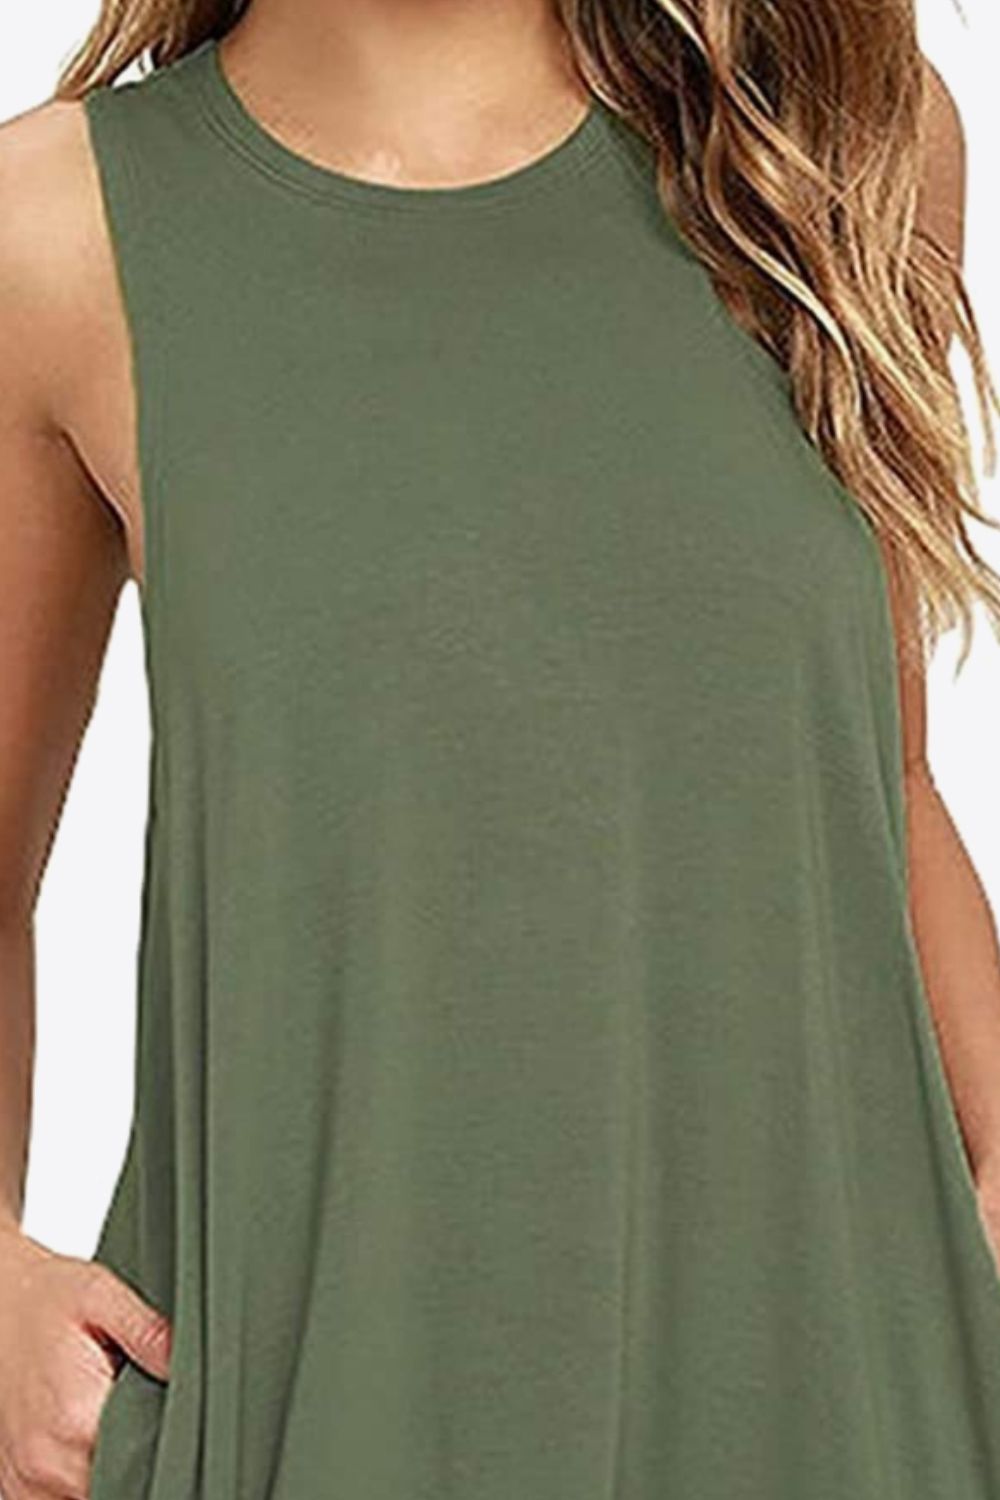 Full Size Round Neck Sleeveless Dress with Pockets | CLOTHING,SHOES & ACCESSORIES | A&D, dress, plus size, Ship From Overseas, Shipping Delay 09/29/2023 - 10/04/2023, Women's Apparel, women's clothing, women's fashion | Trendsi